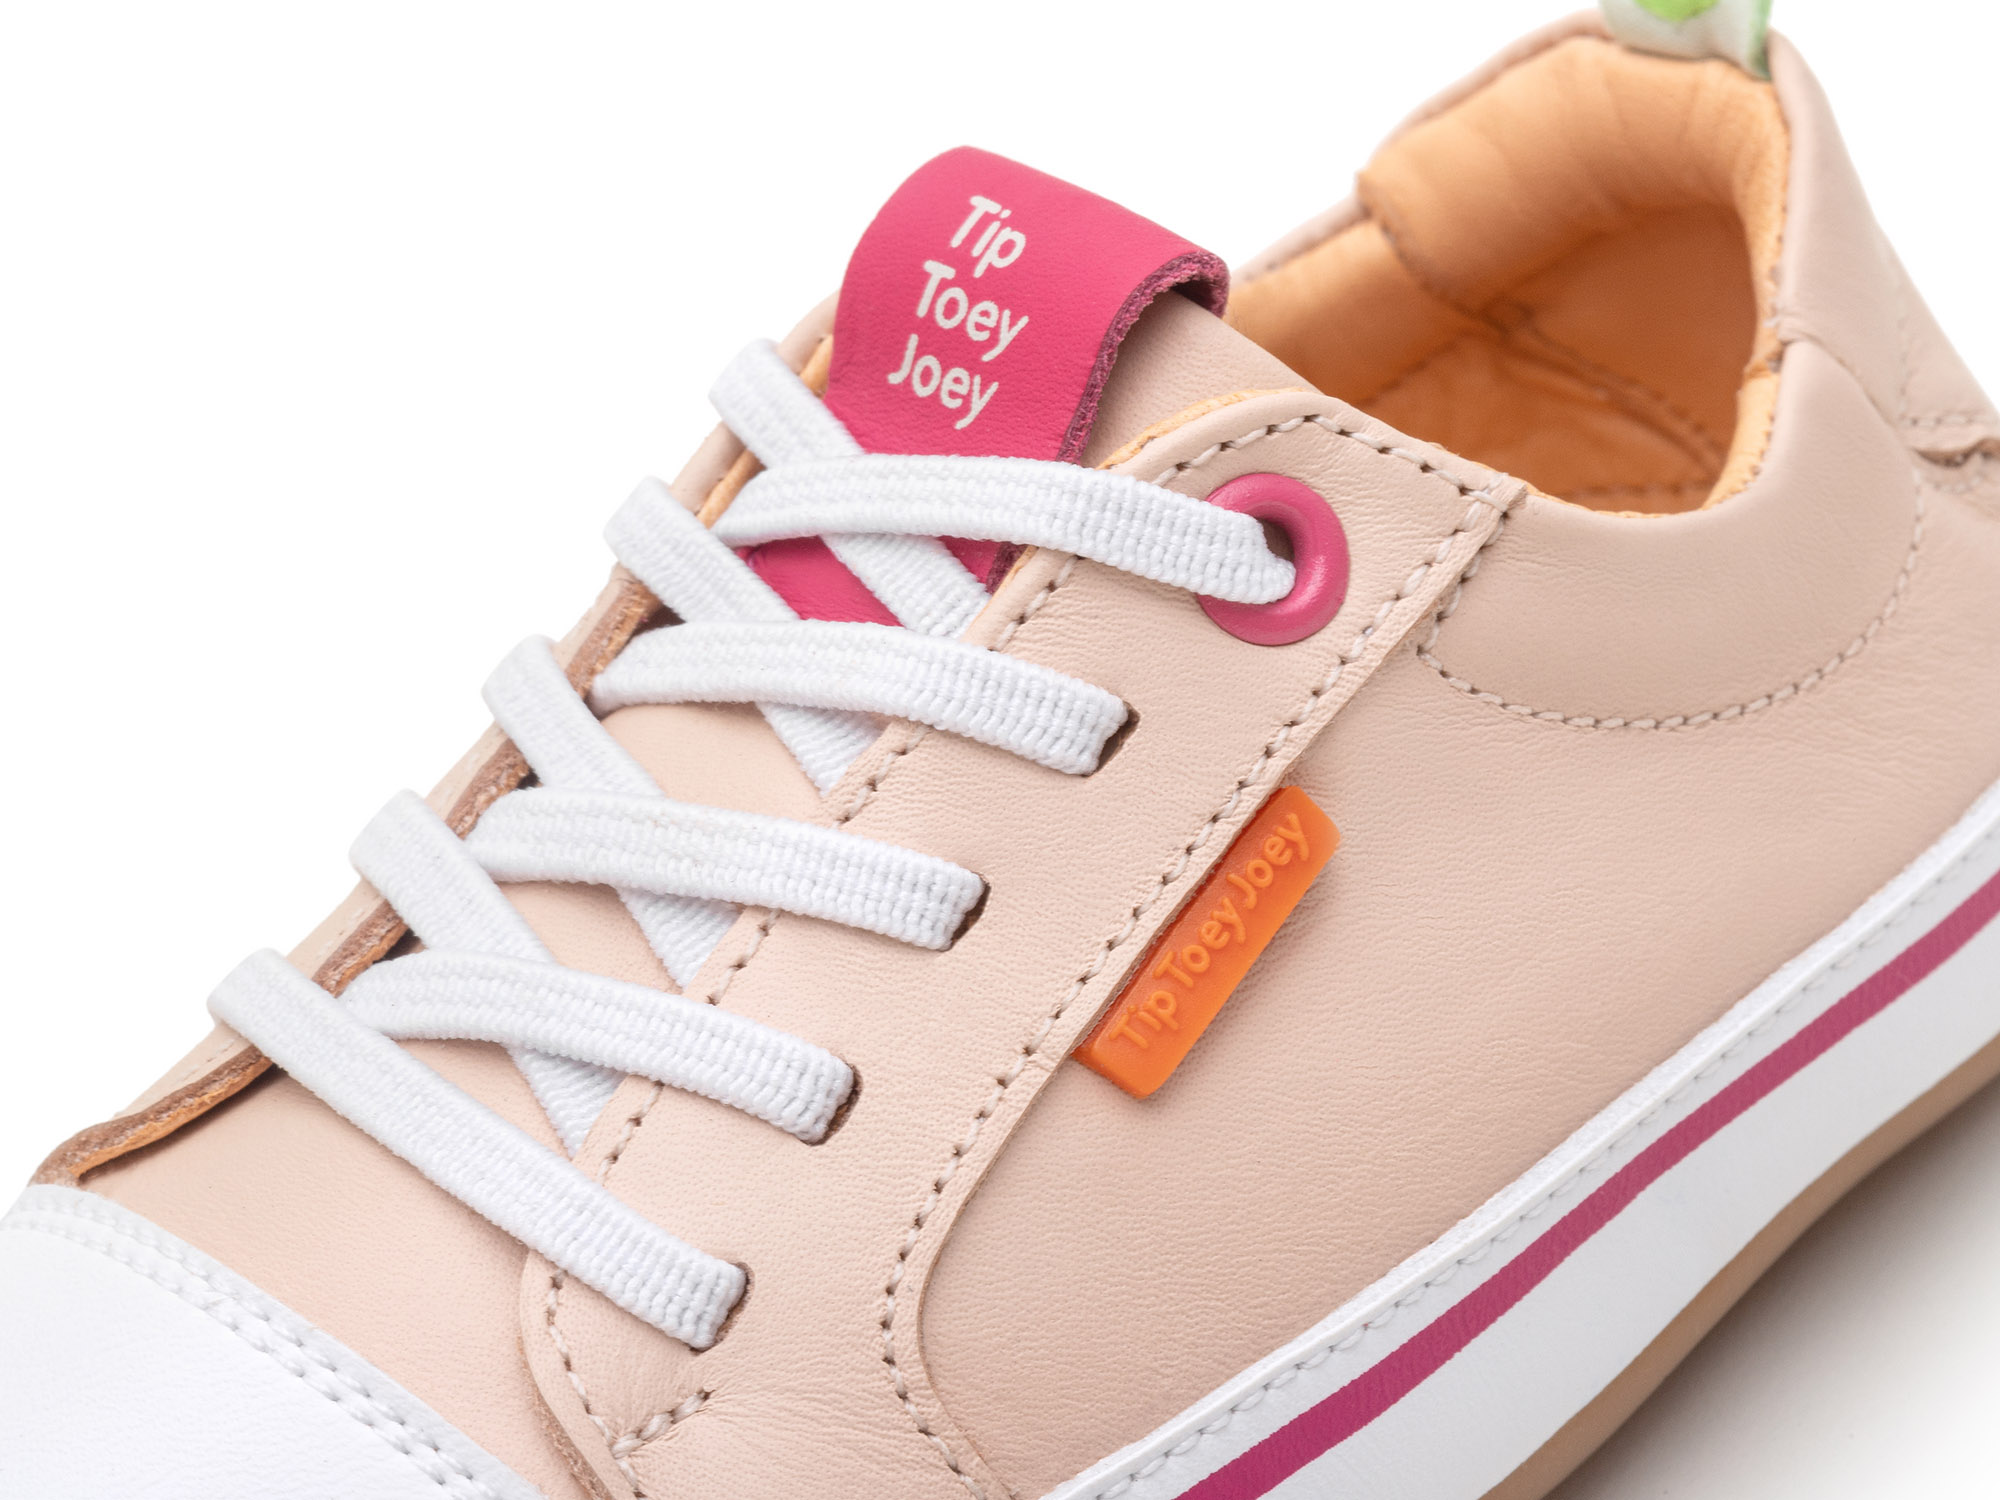 UP & GO Sneakers for Girls Funky Colors | Tip Toey Joey - Australia - 5